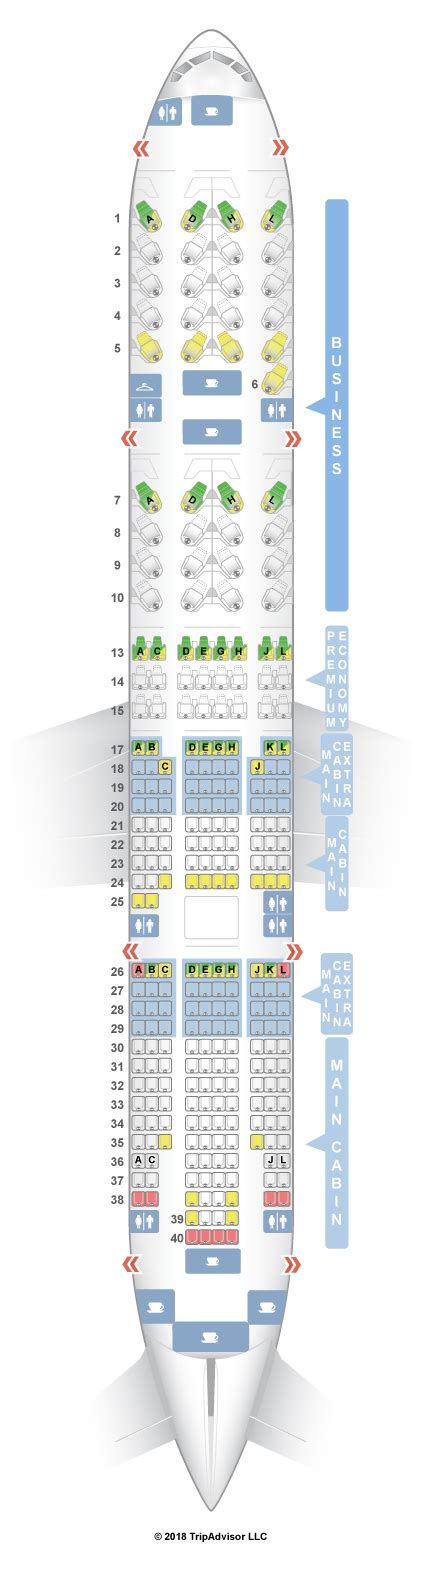 american airlines boeing 777 jet seat map